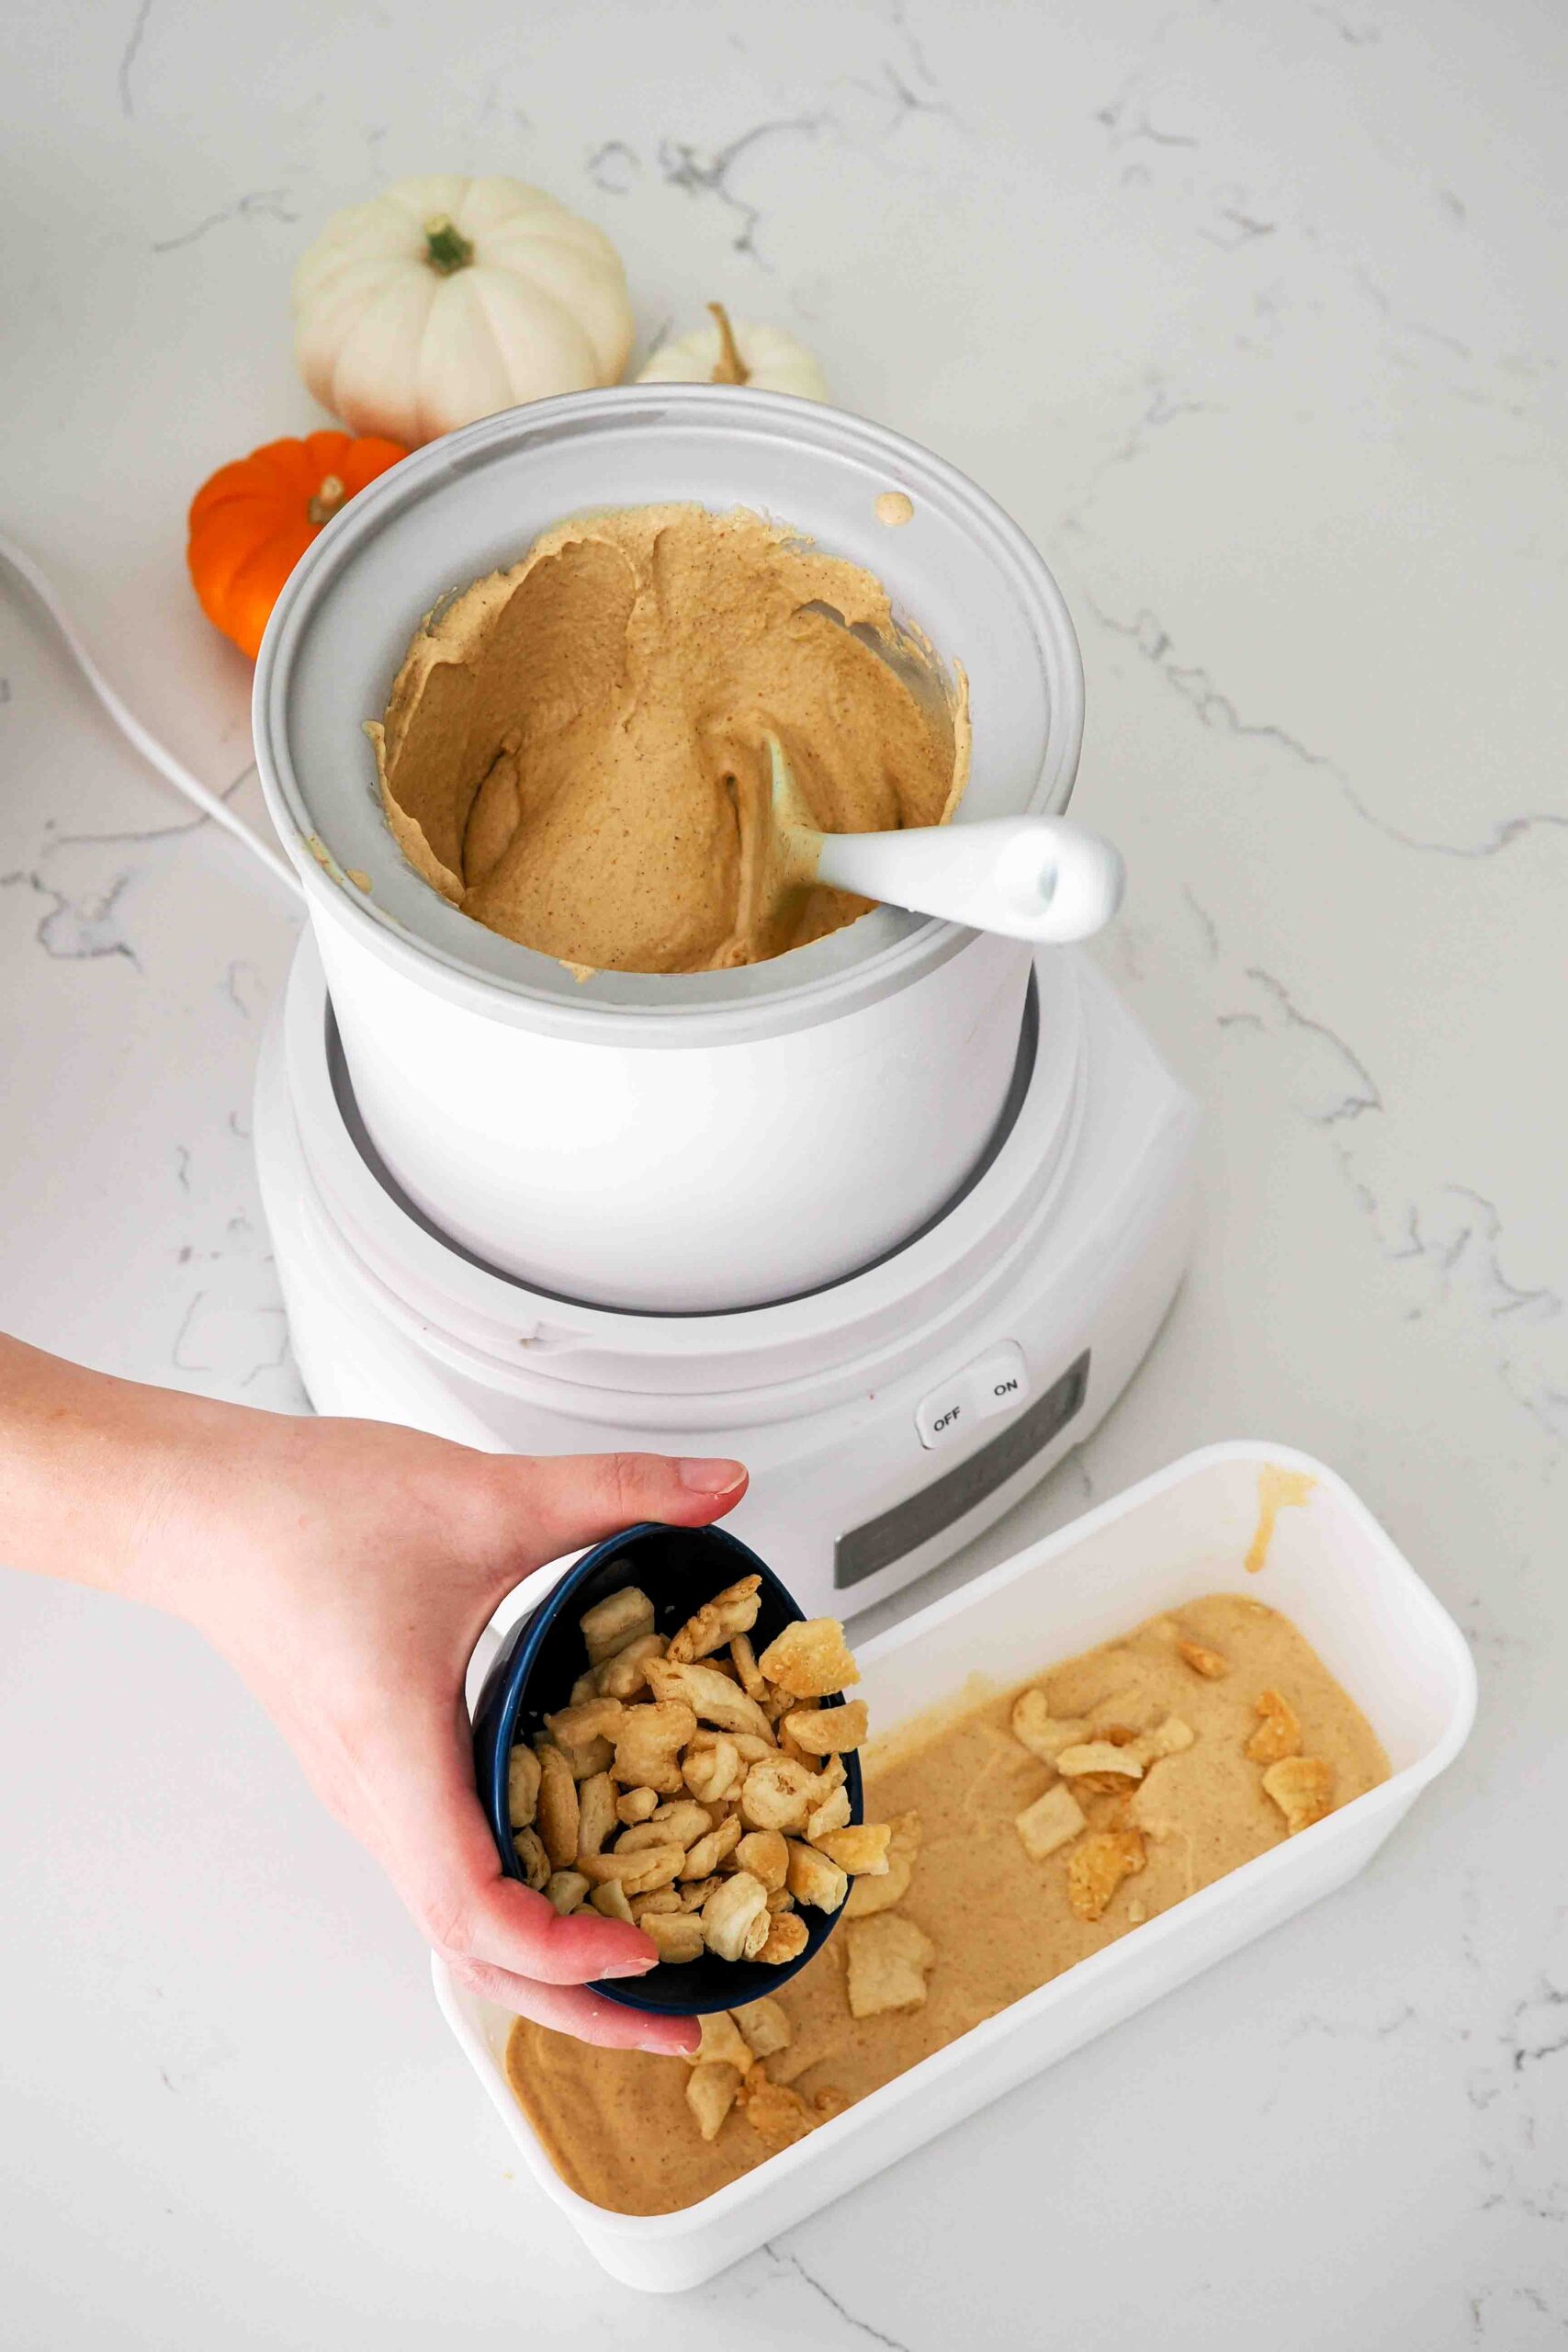 A hand sprinkles pie crust pieces into a container of homemade pumpkin ice cream.